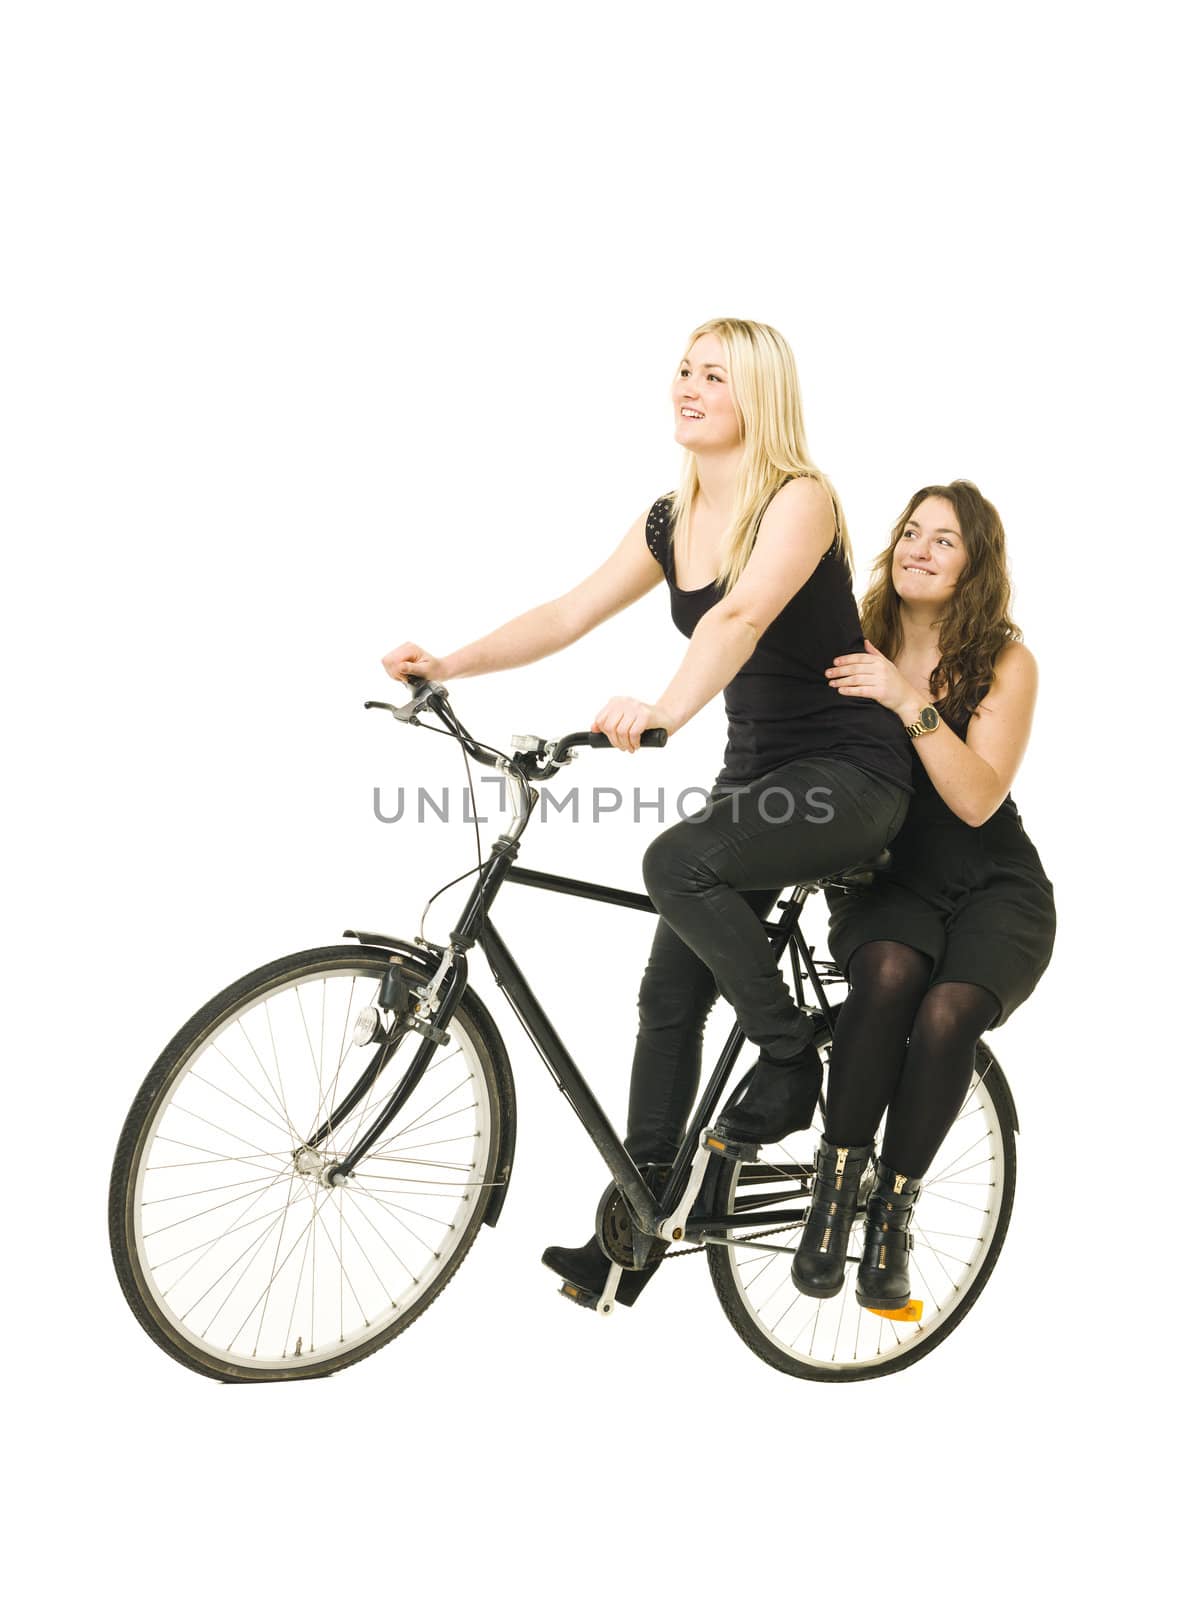 Women on a bicycle by gemenacom